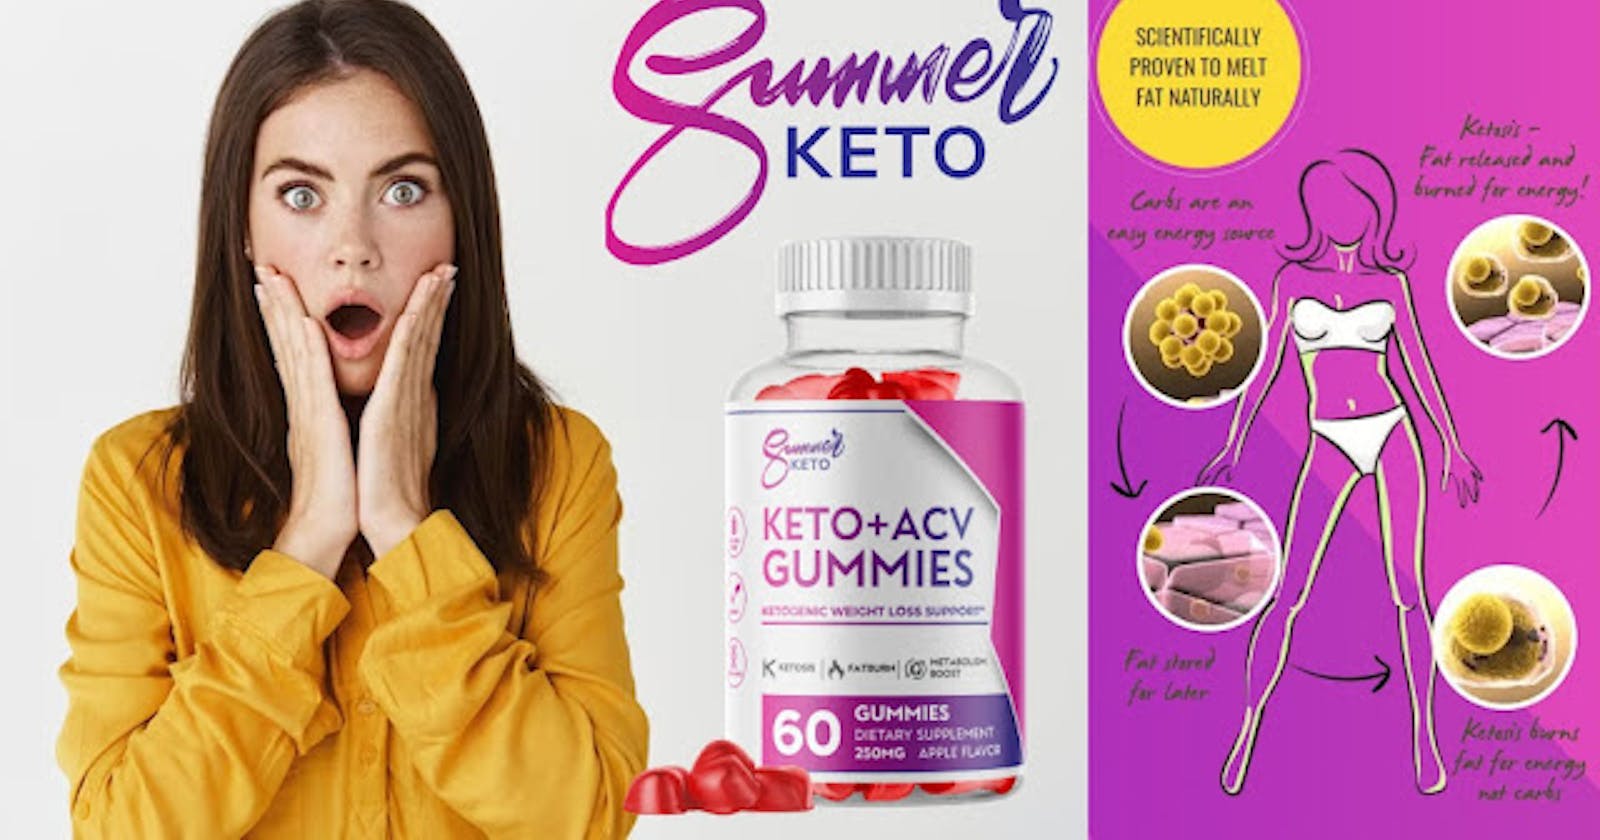 Summer Keto ACV Gummies UK Sunshine in a Bottle: Experience the Magic